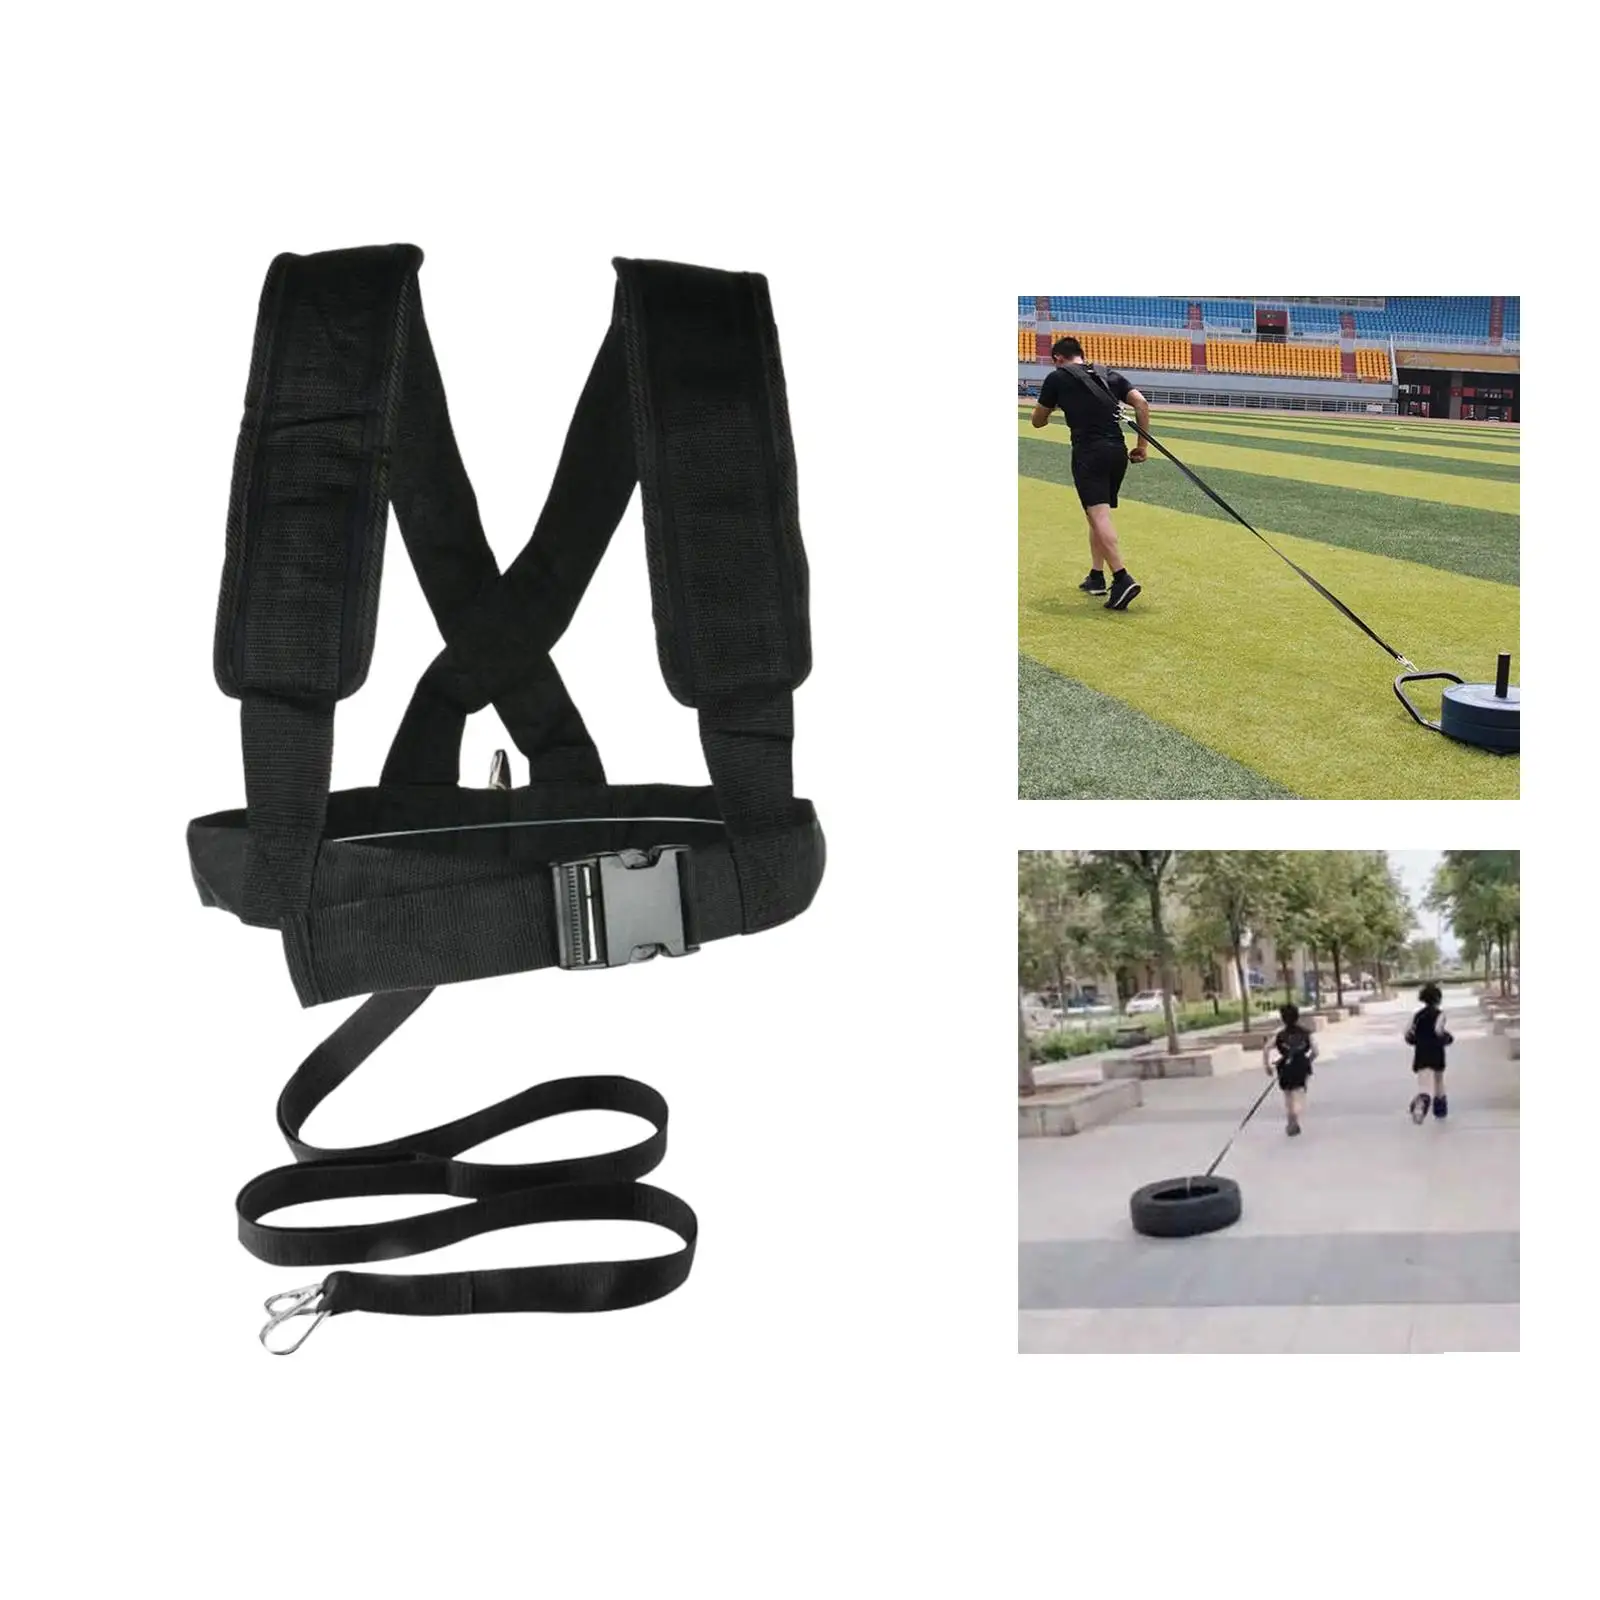 Sled Harness Team Sports Speed Agility Training Kit Straps Tire Pulling Harness Workout Padded Exercise Trainer of Speed